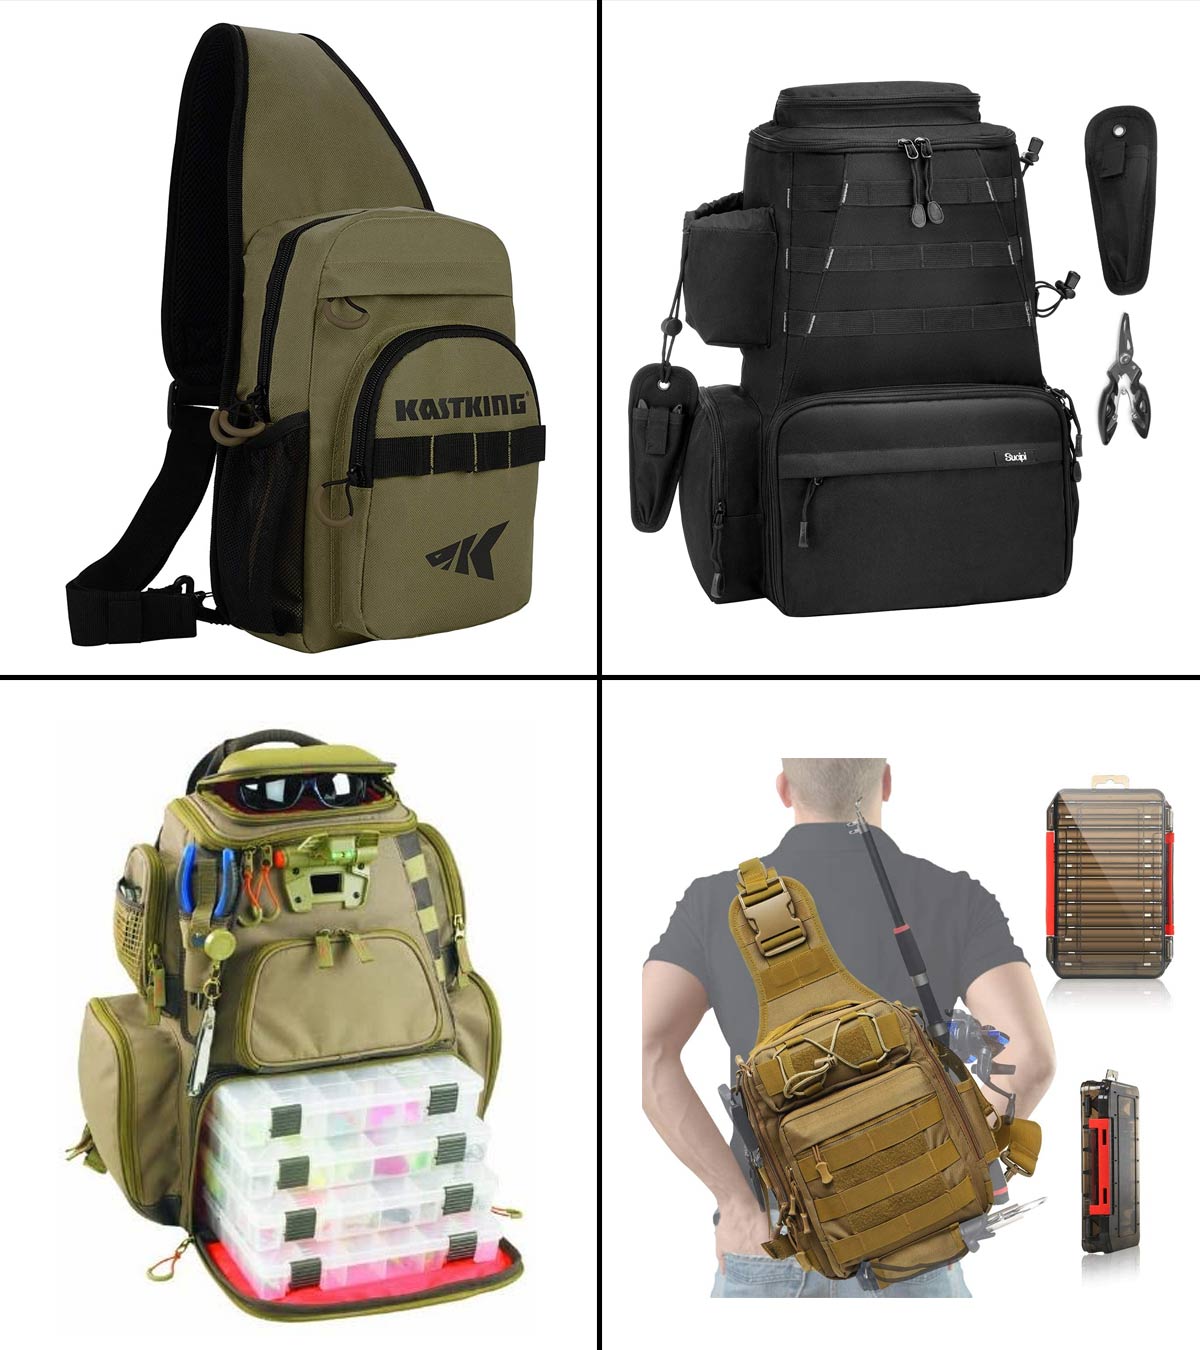 Finding the Best Fishing Backpack - Reviews and Buying Guide